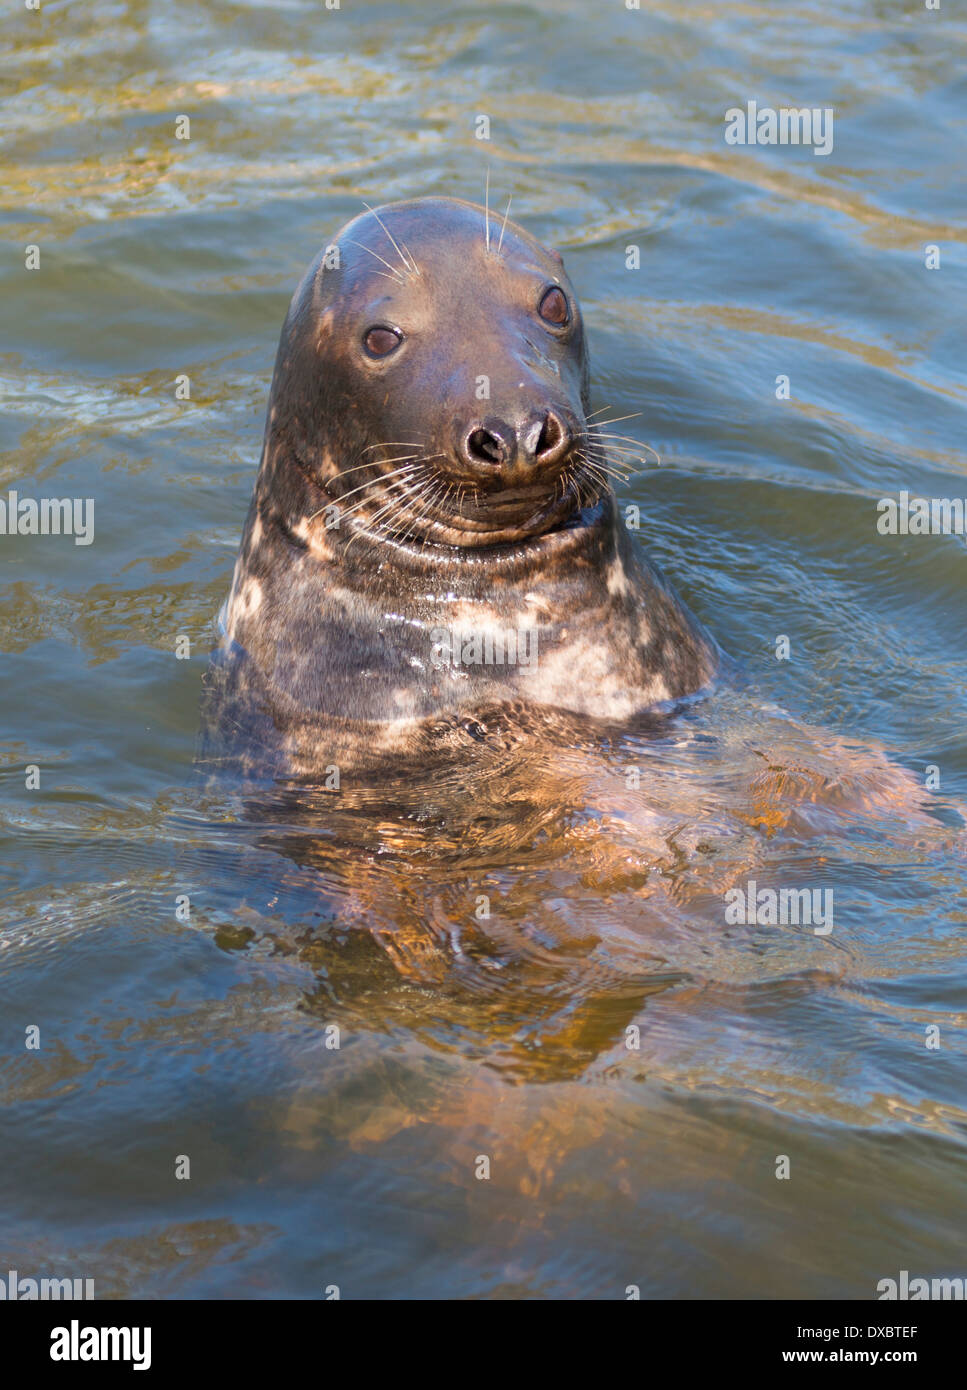 Seal image was captured at Skansen Open Air Museum in Stockholm. Stock Photo